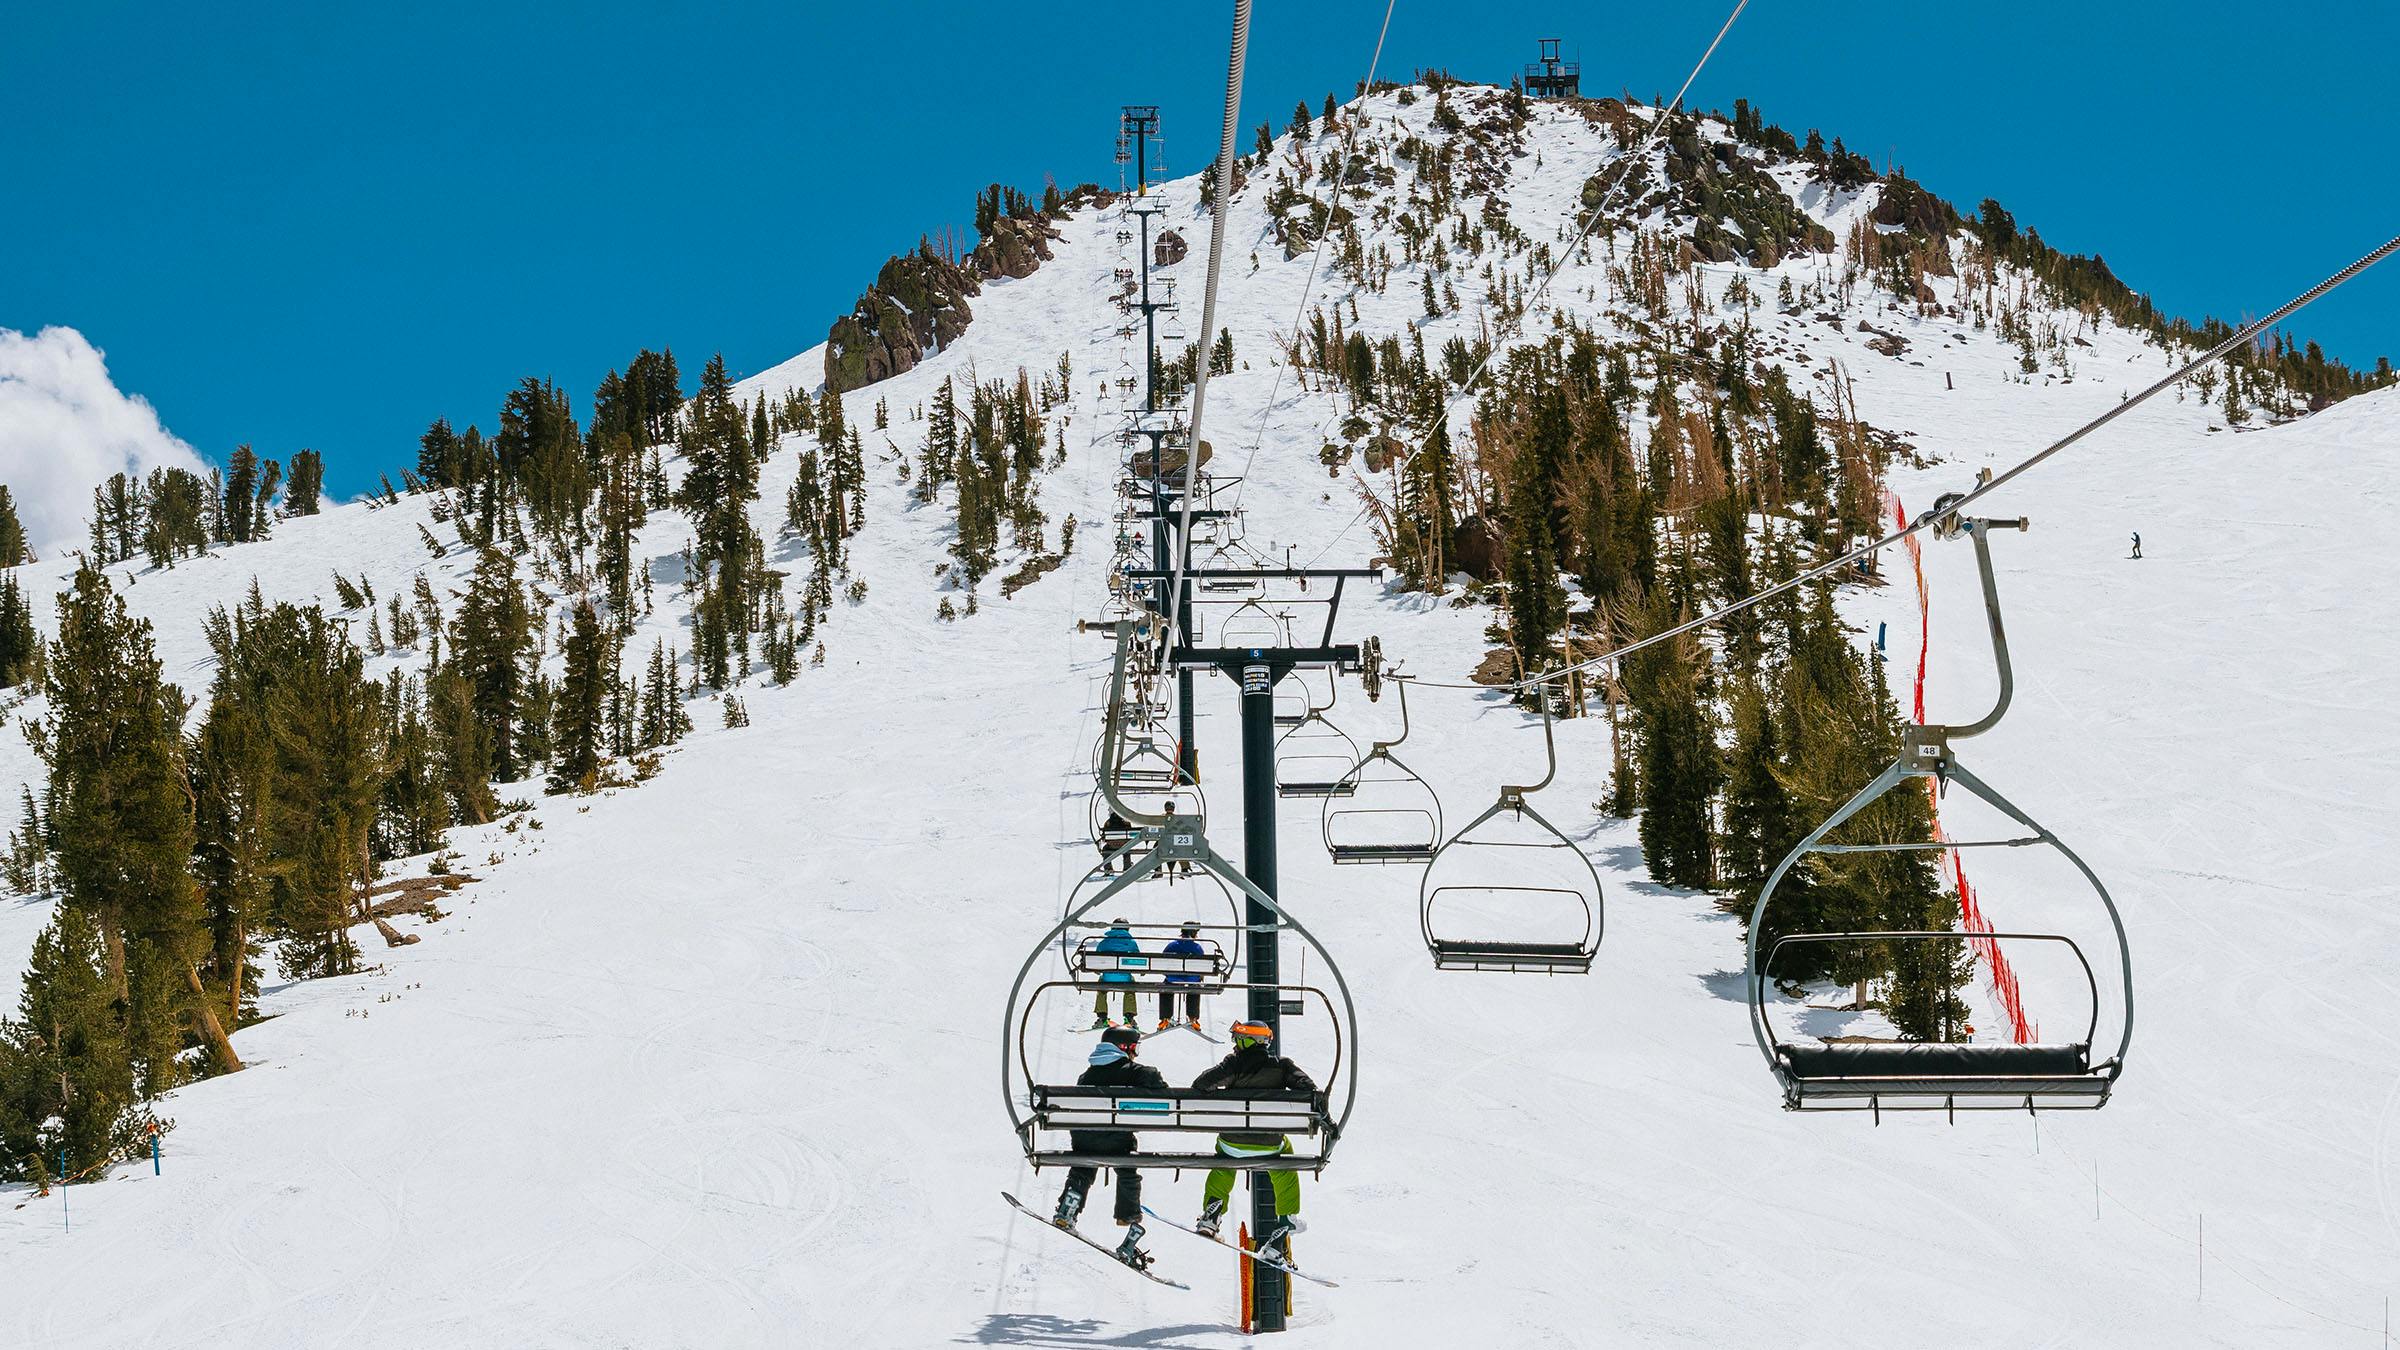 Chair lift on bluebird day at Mammoth MOuntain